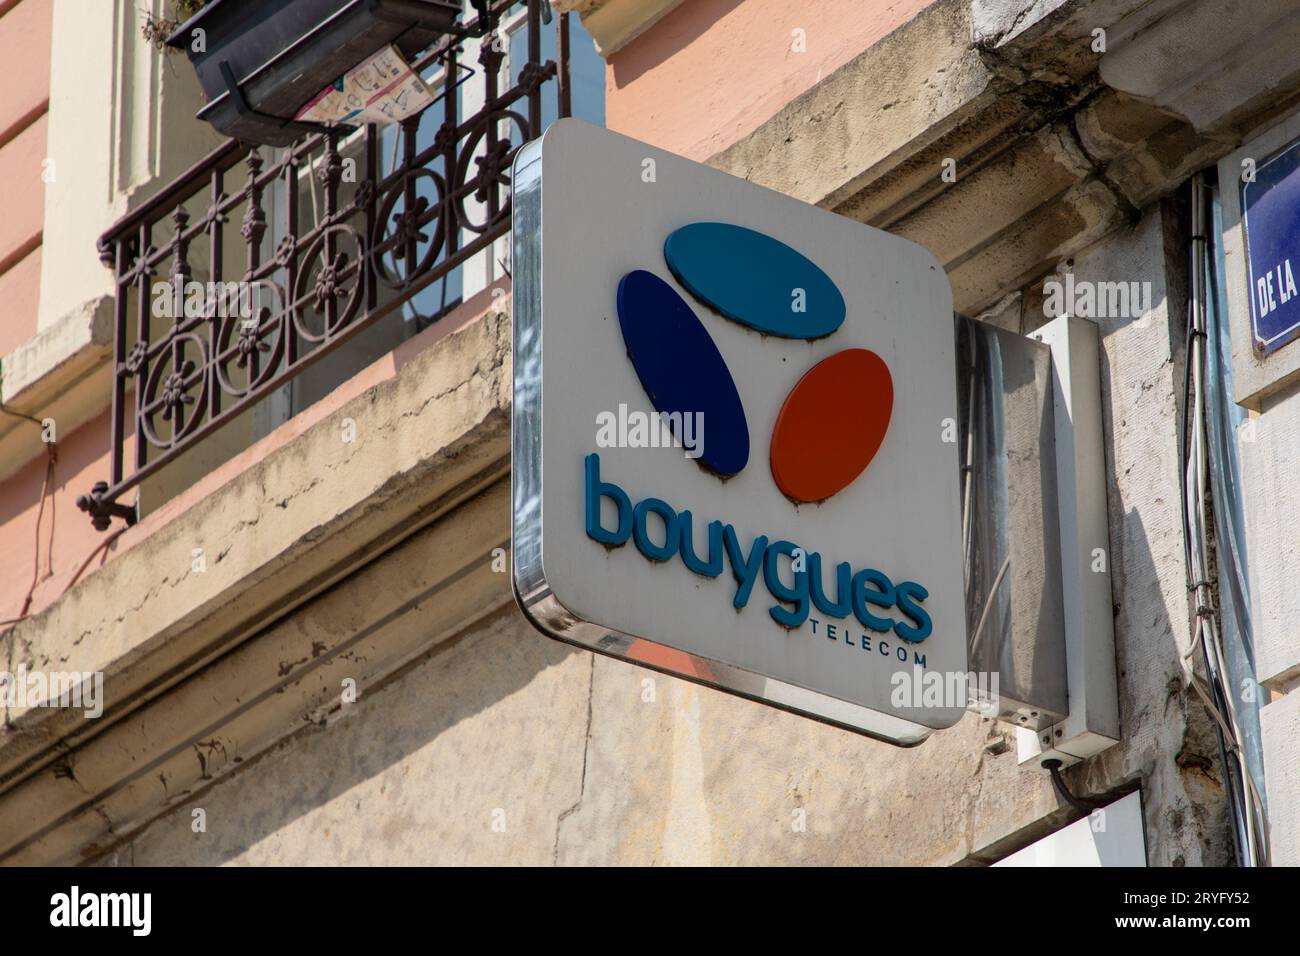 Bordeaux , France - 09 18 2023 : Bouygues telecom store logo and brand text sign boutique front wall facade shop of french telecommunications company Stock Photo